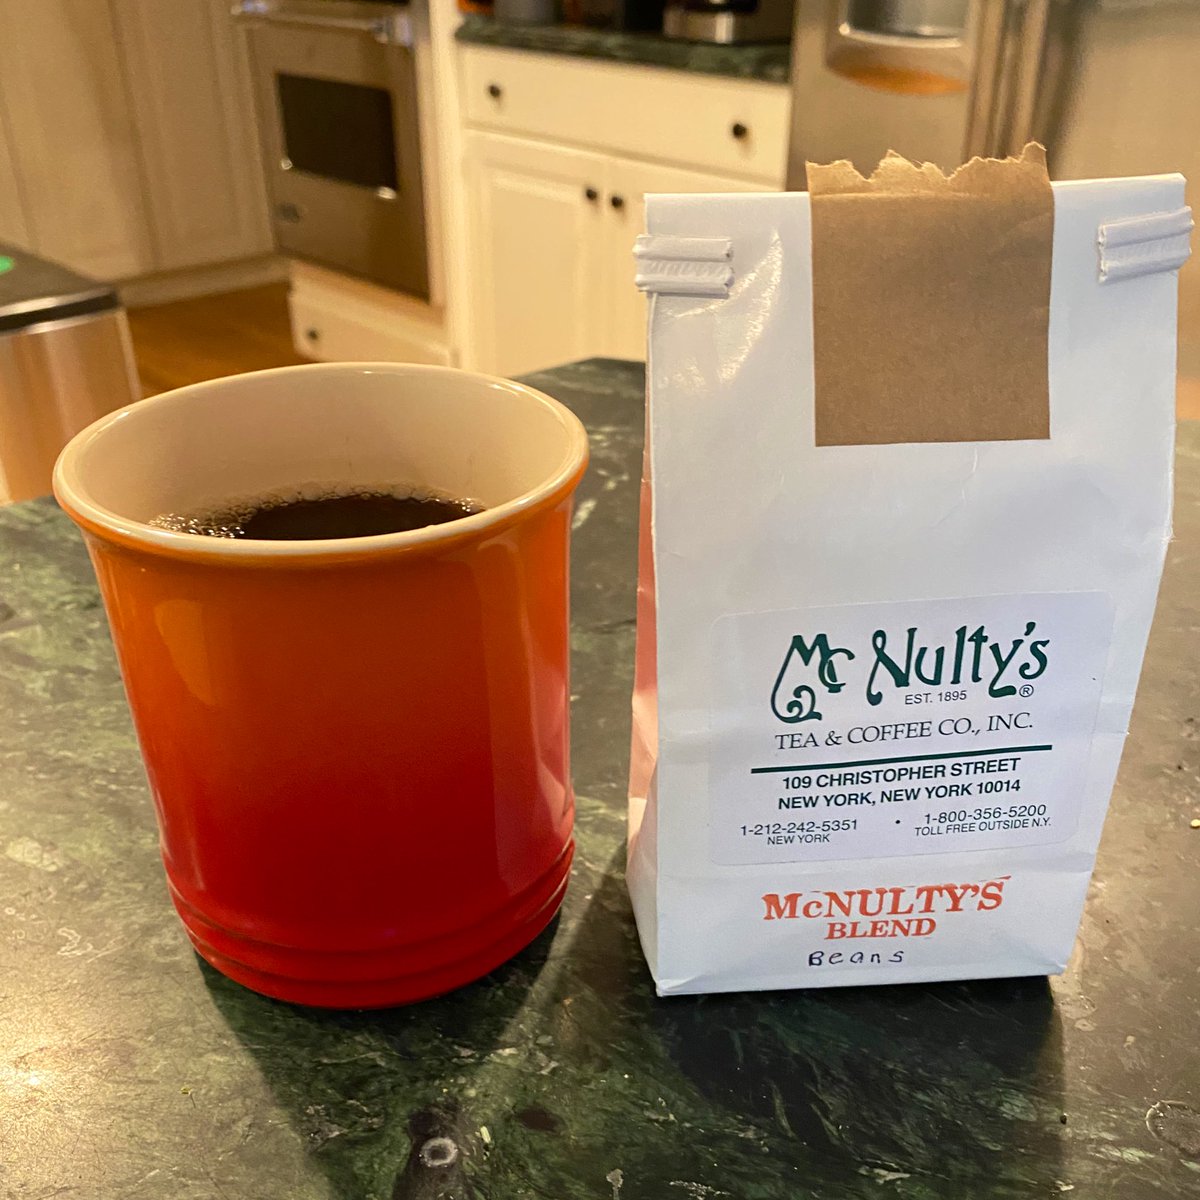 McNulty’s Tea & Coffee Co. McNulty’s BlendAnother solid offering from McNulty’s in the West Village. This one is a blend of Mexican Coatepec, Costa Rican and French Colombian beans that really comes together nicely.